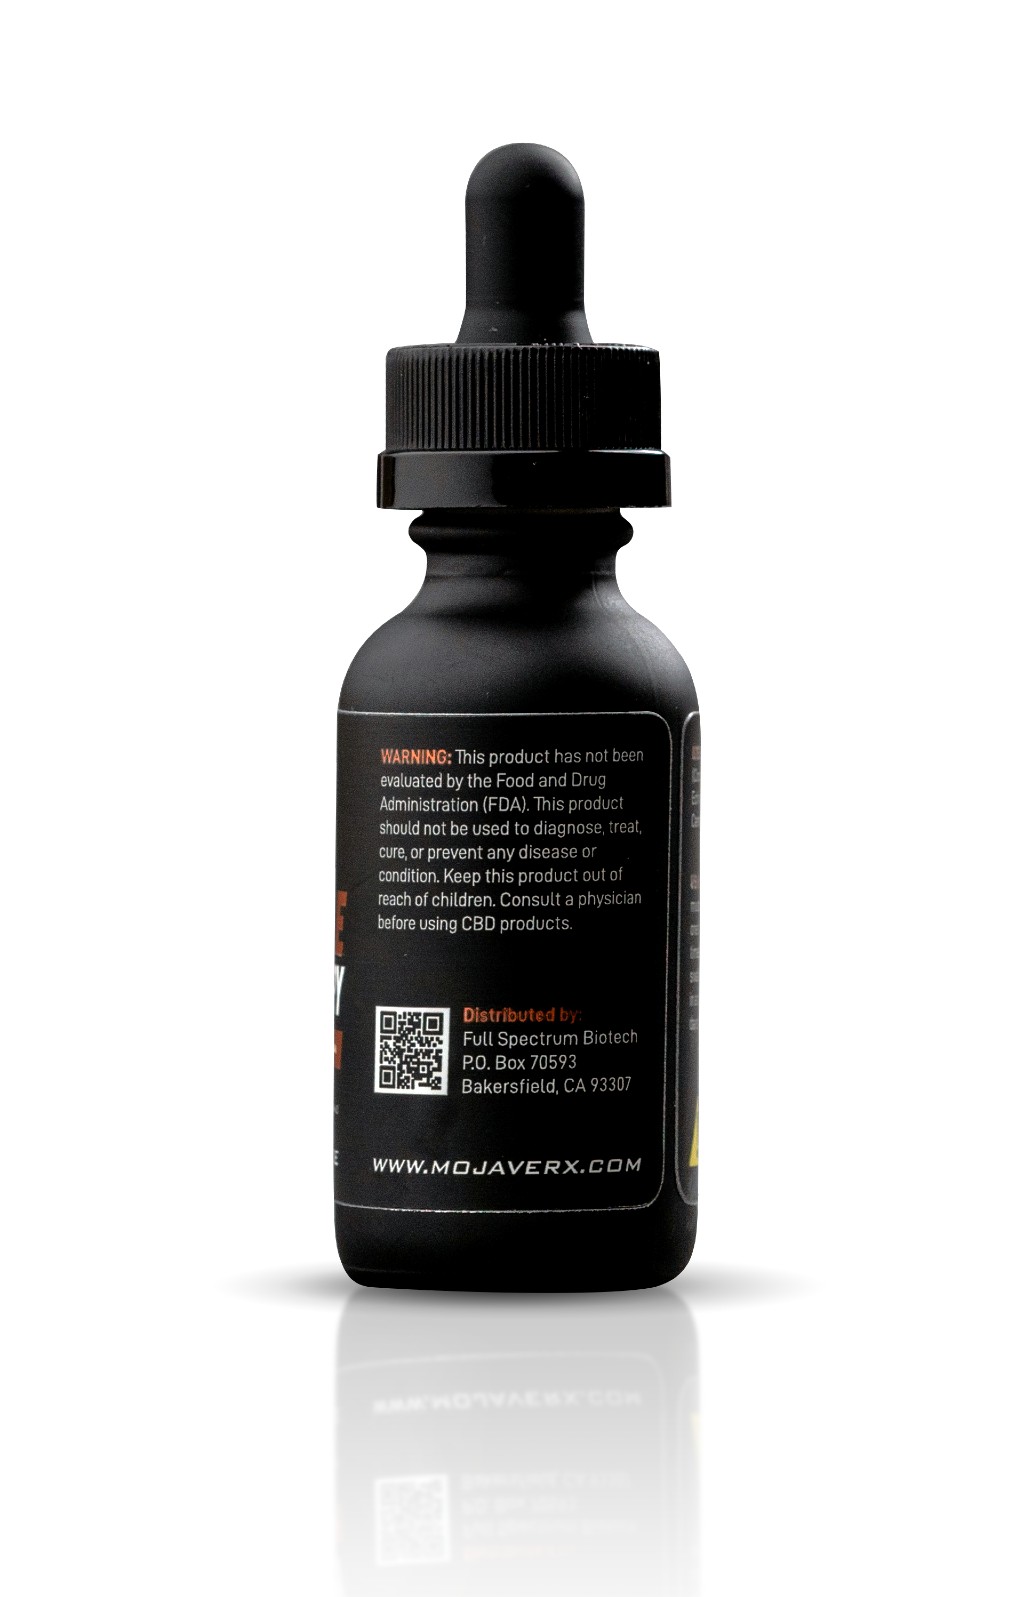 CBD tincture bottle with QR code to check the certificate of analysis